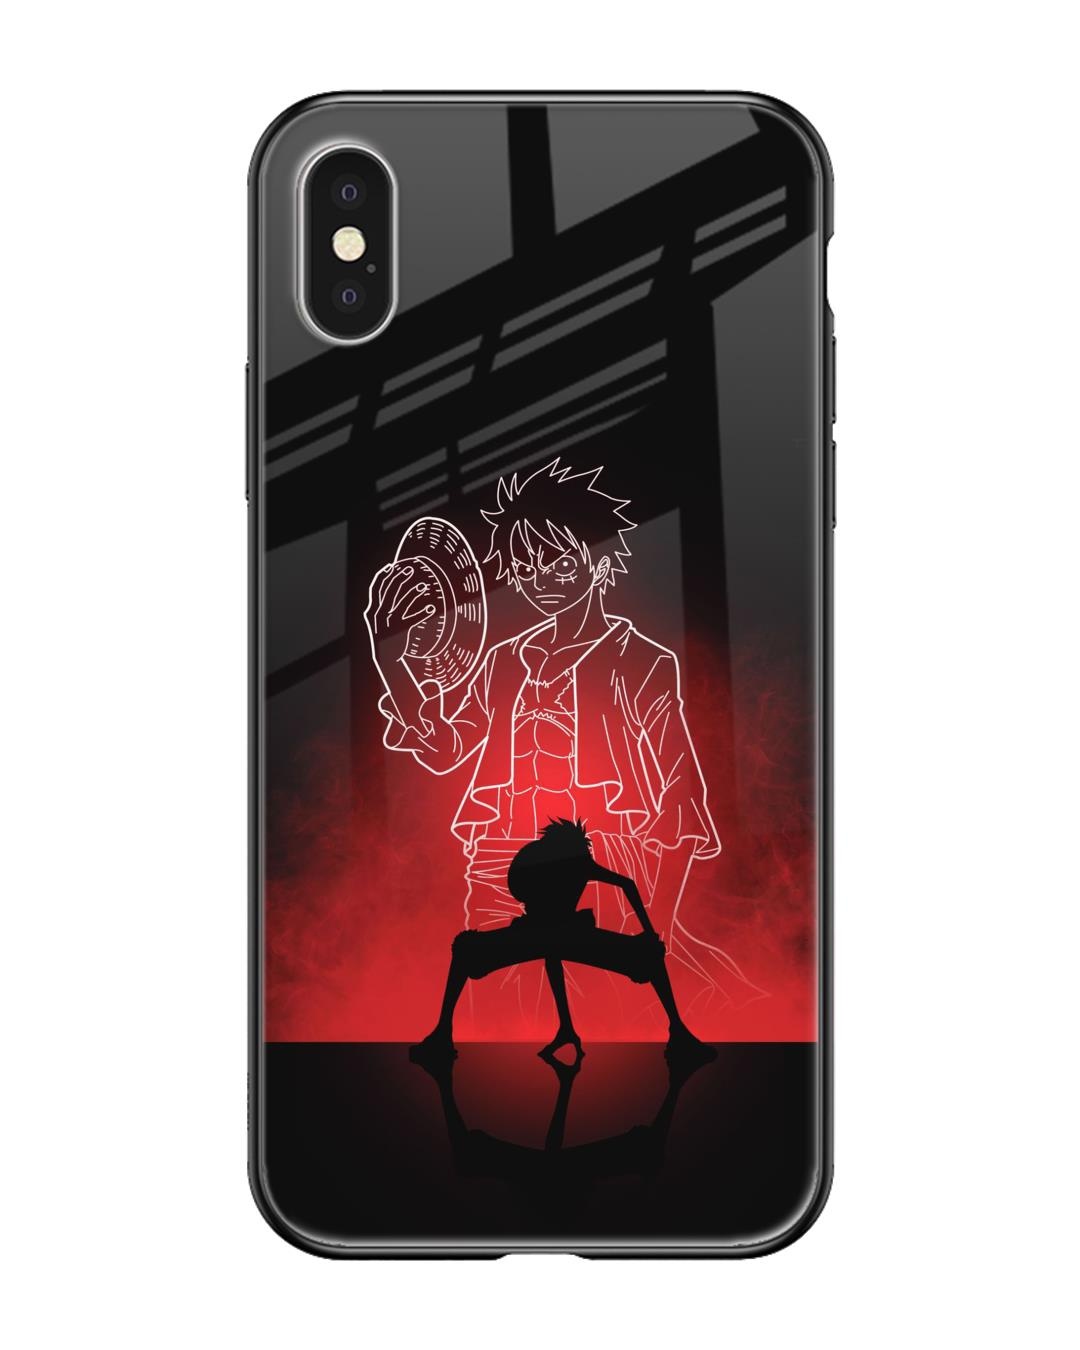 How To Train Your Dragon Anime iPhone XS Max Case